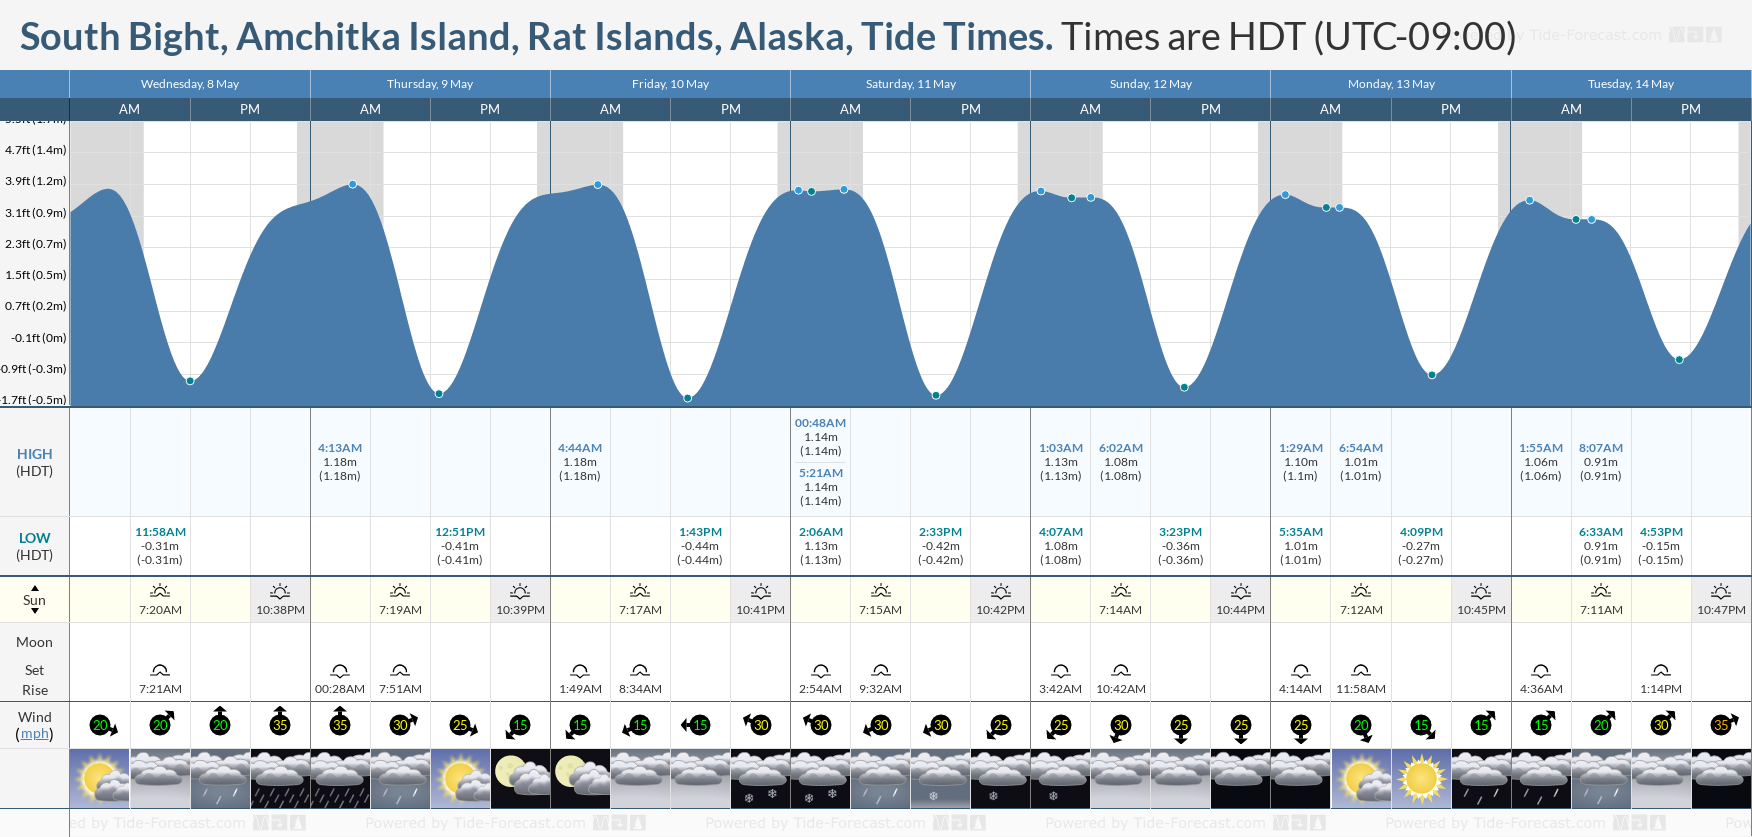 South Bight, Amchitka Island, Rat Islands, Alaska Tide Chart including high and low tide tide times for the next 7 days